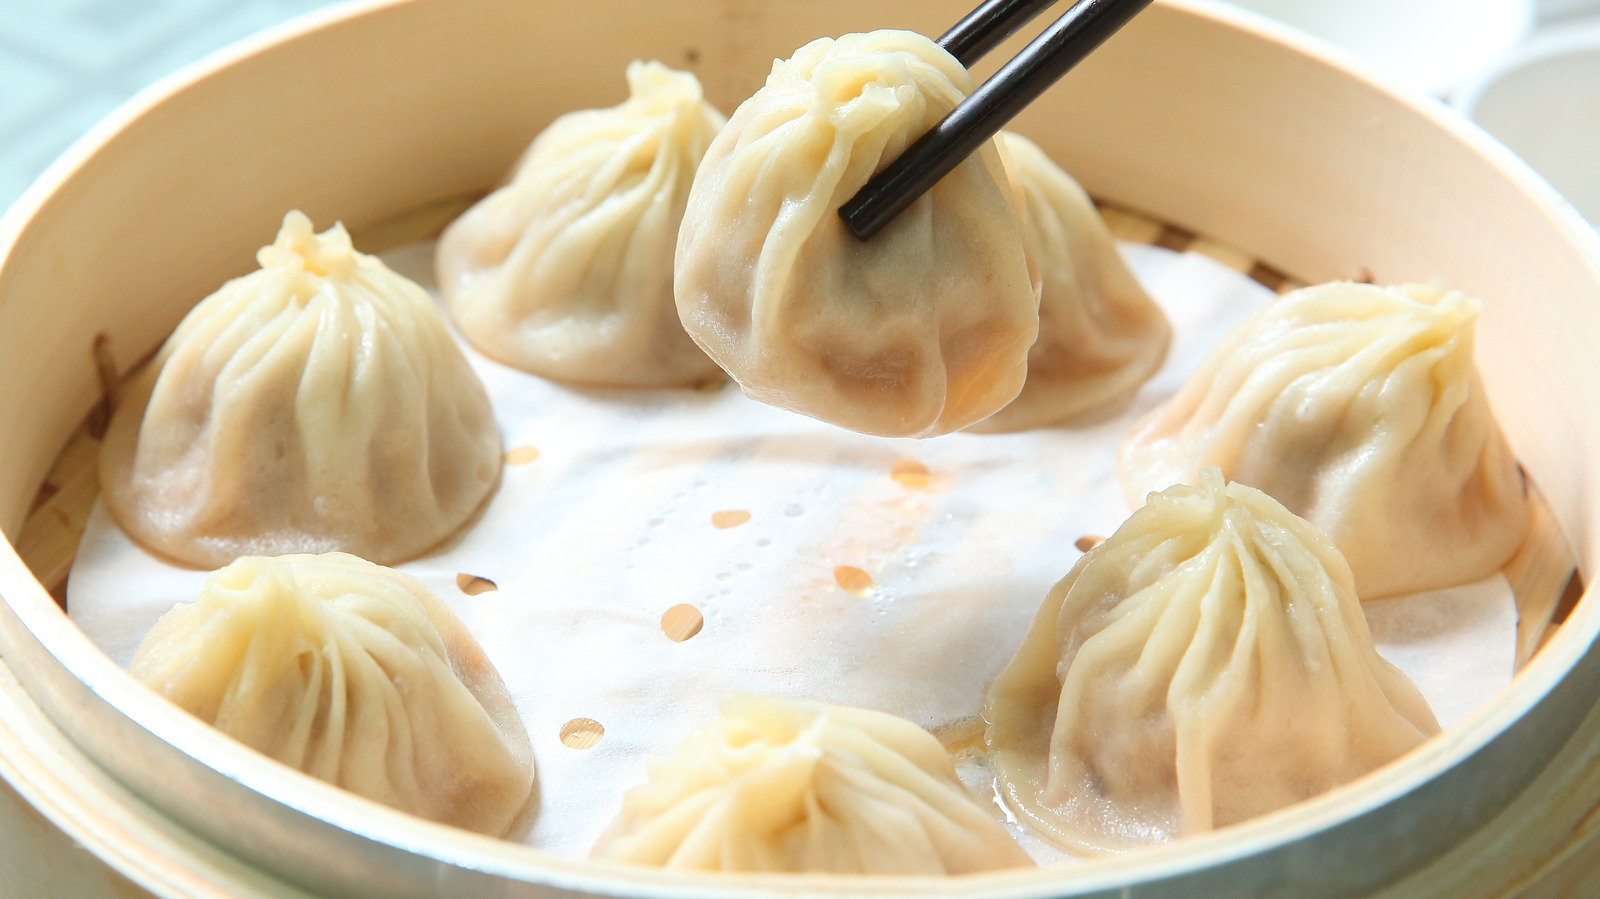 https://www.mashed.com/img/gallery/what-are-soup-dumplings-and-how-are-they-made/l-intro-1621969518.jpg